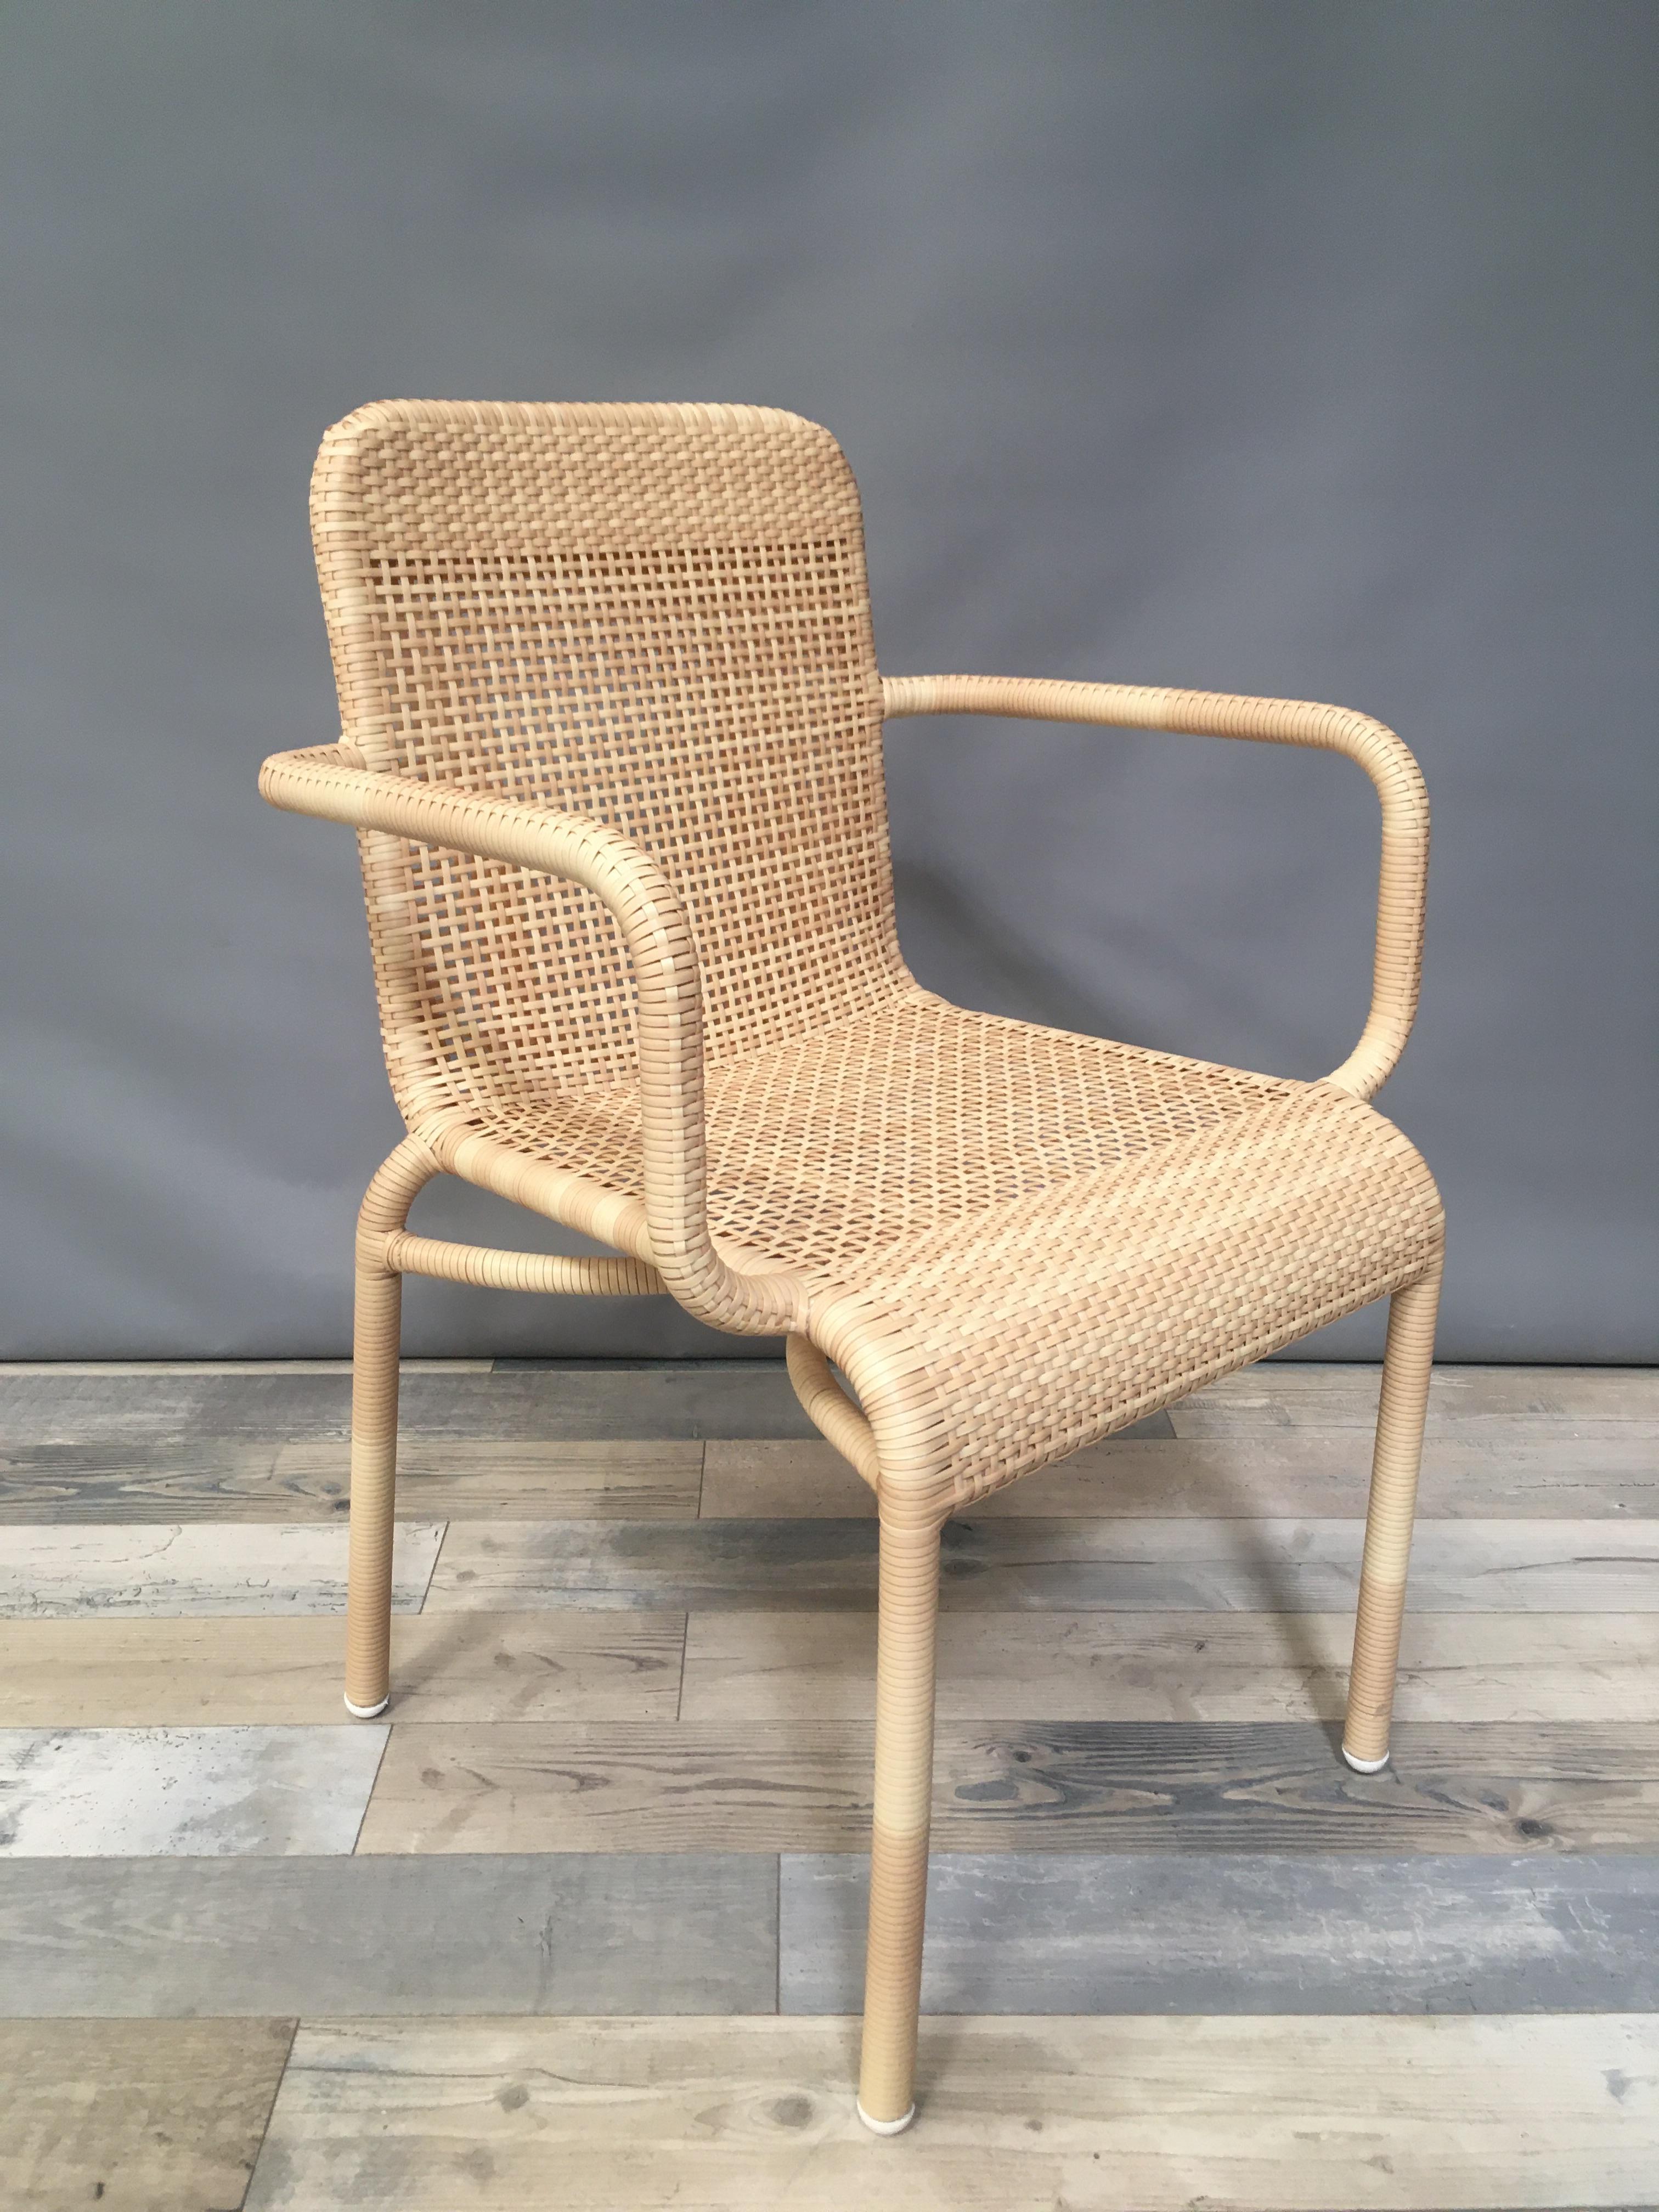 French Design and Braided Resin Rattan Effect Outdoor Chair For Sale 2